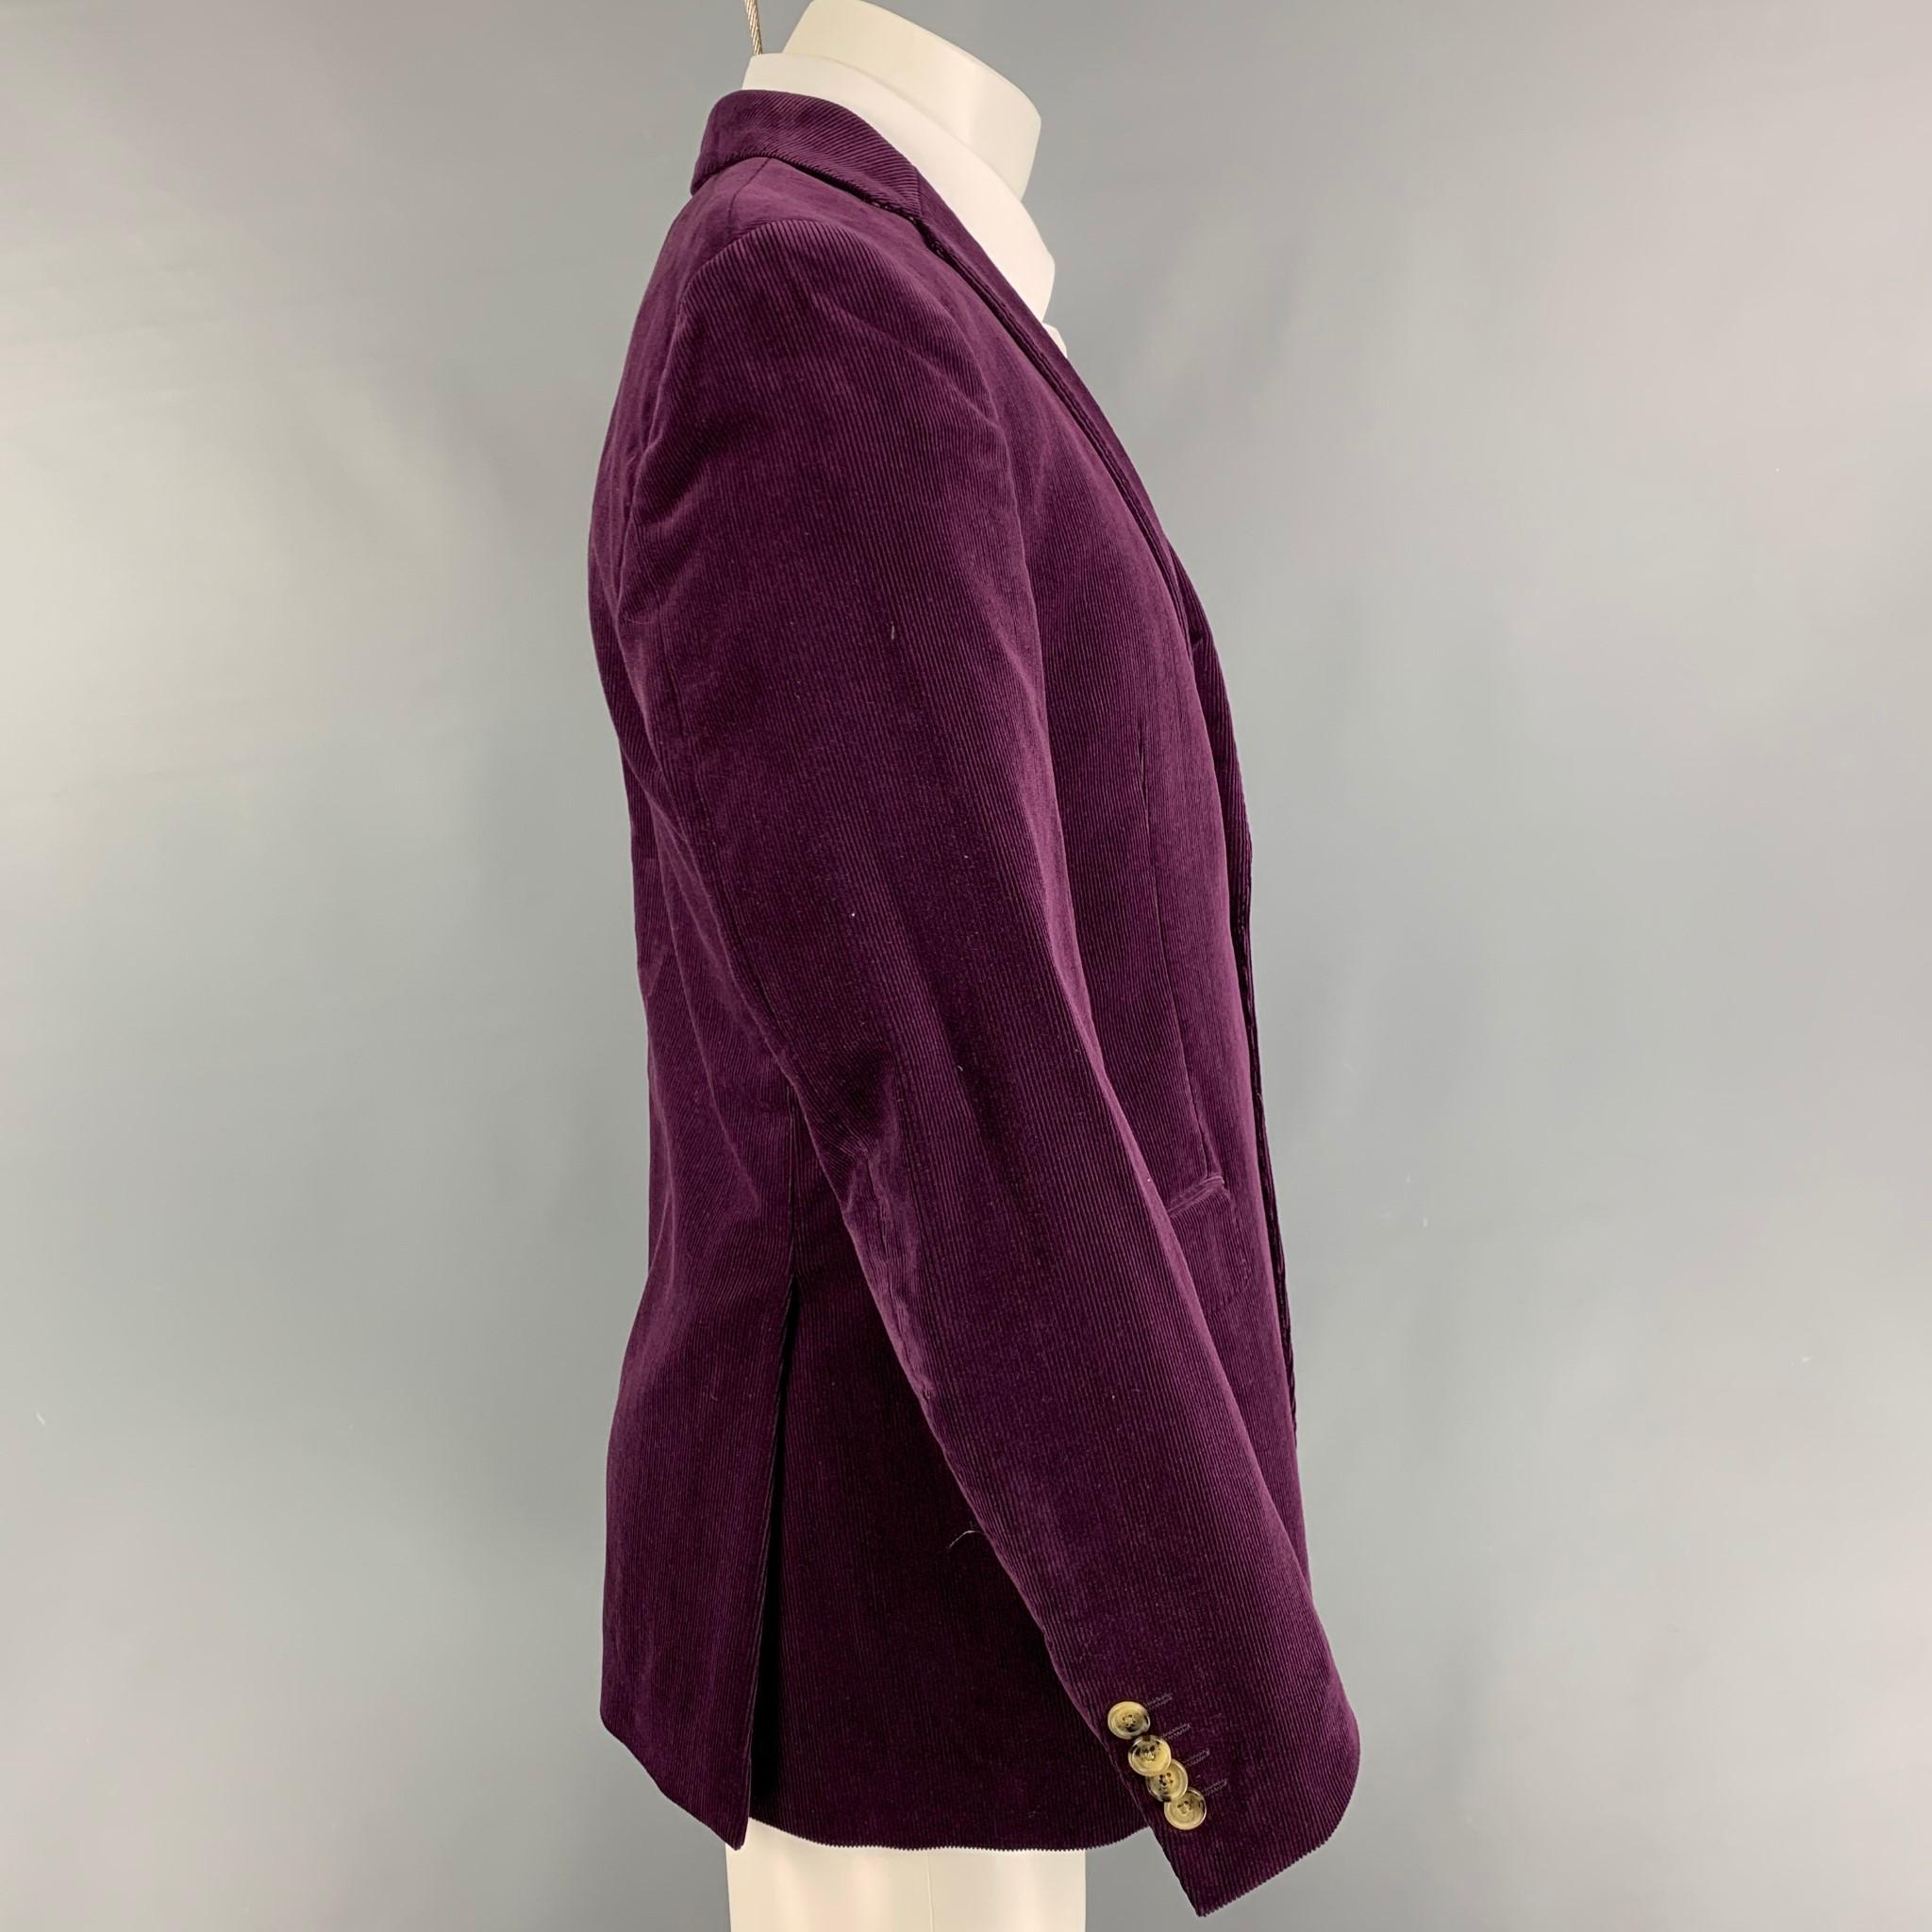 ETRO sport coat comes in a purple corduroy cotton with a full liner featuring a notch lapel, flap pockets, double back vent, and a double button closure. Made in Italy. 

Very Good Pre-Owned Condition.
Marked: 50

Measurements:

Shoulder: 18